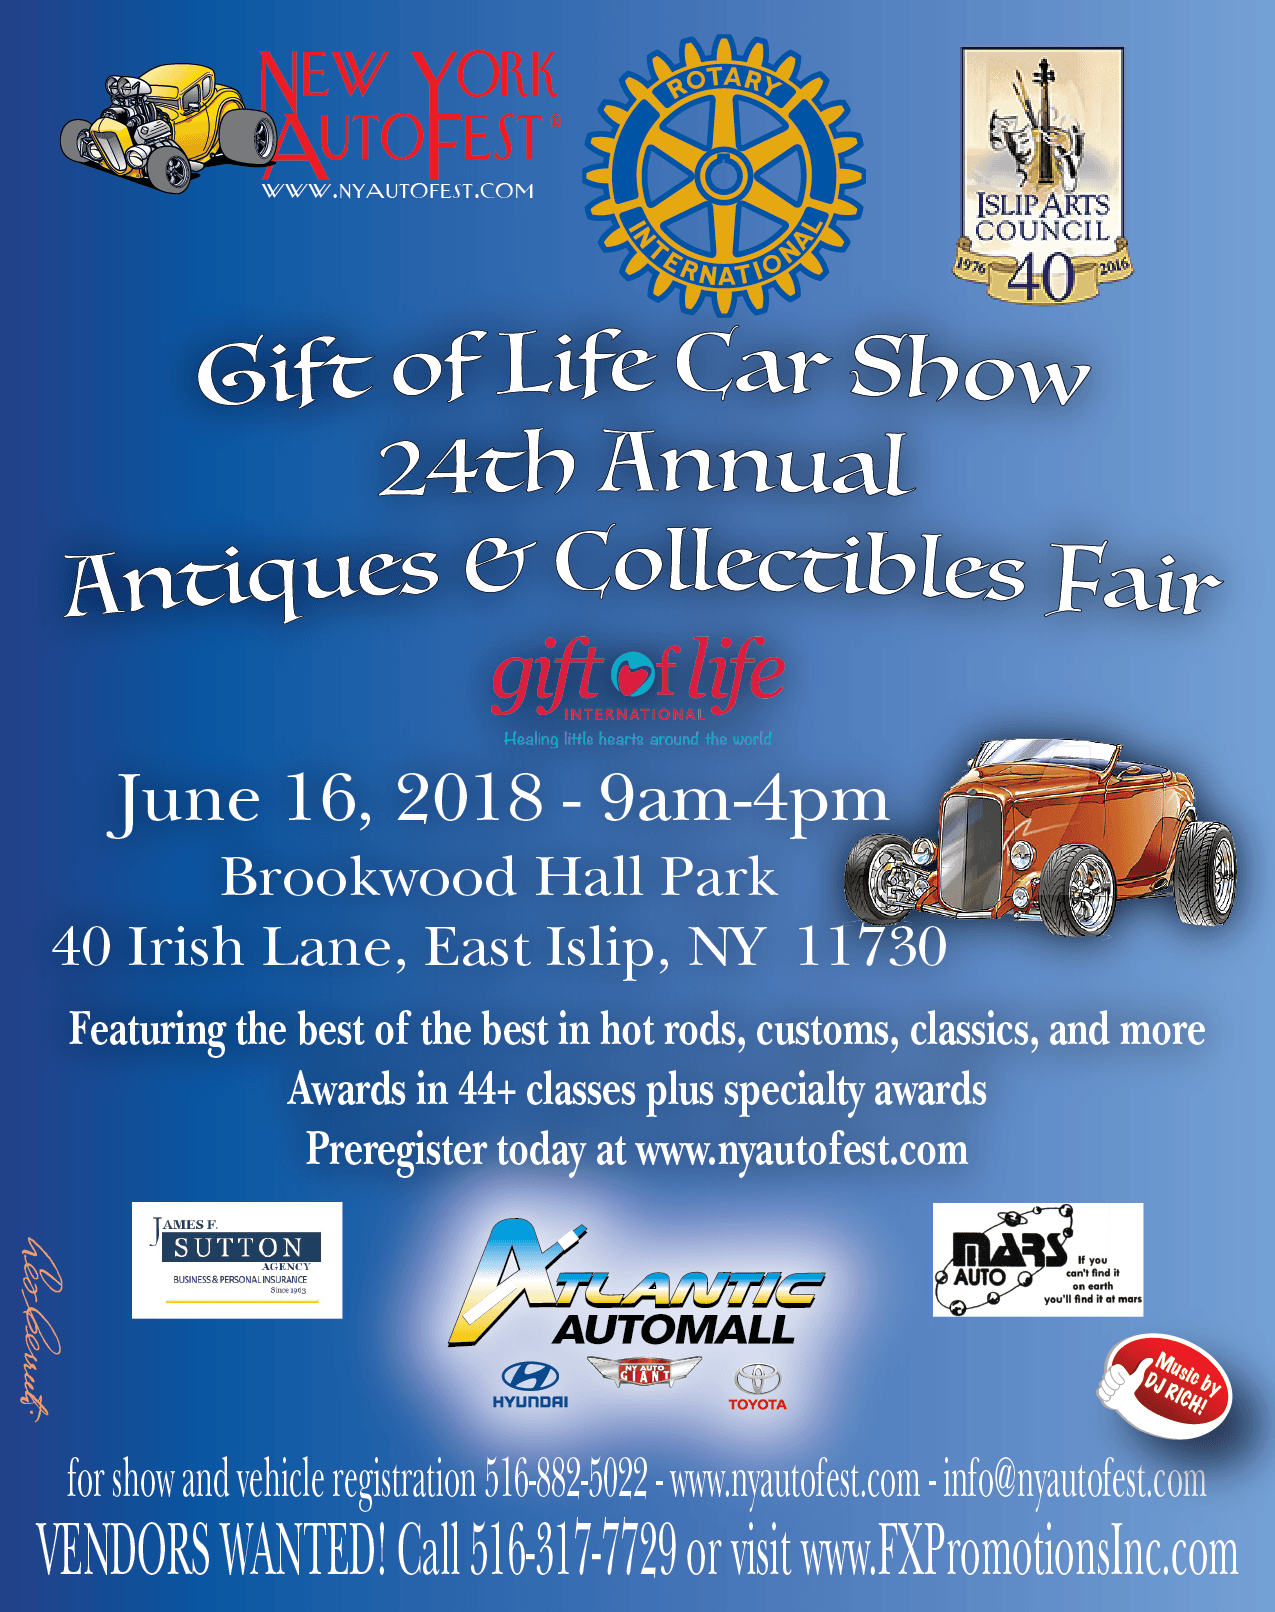 New York AutoFest Gift of Life Car Show 24th Annual Antiques & Collectibles Fair